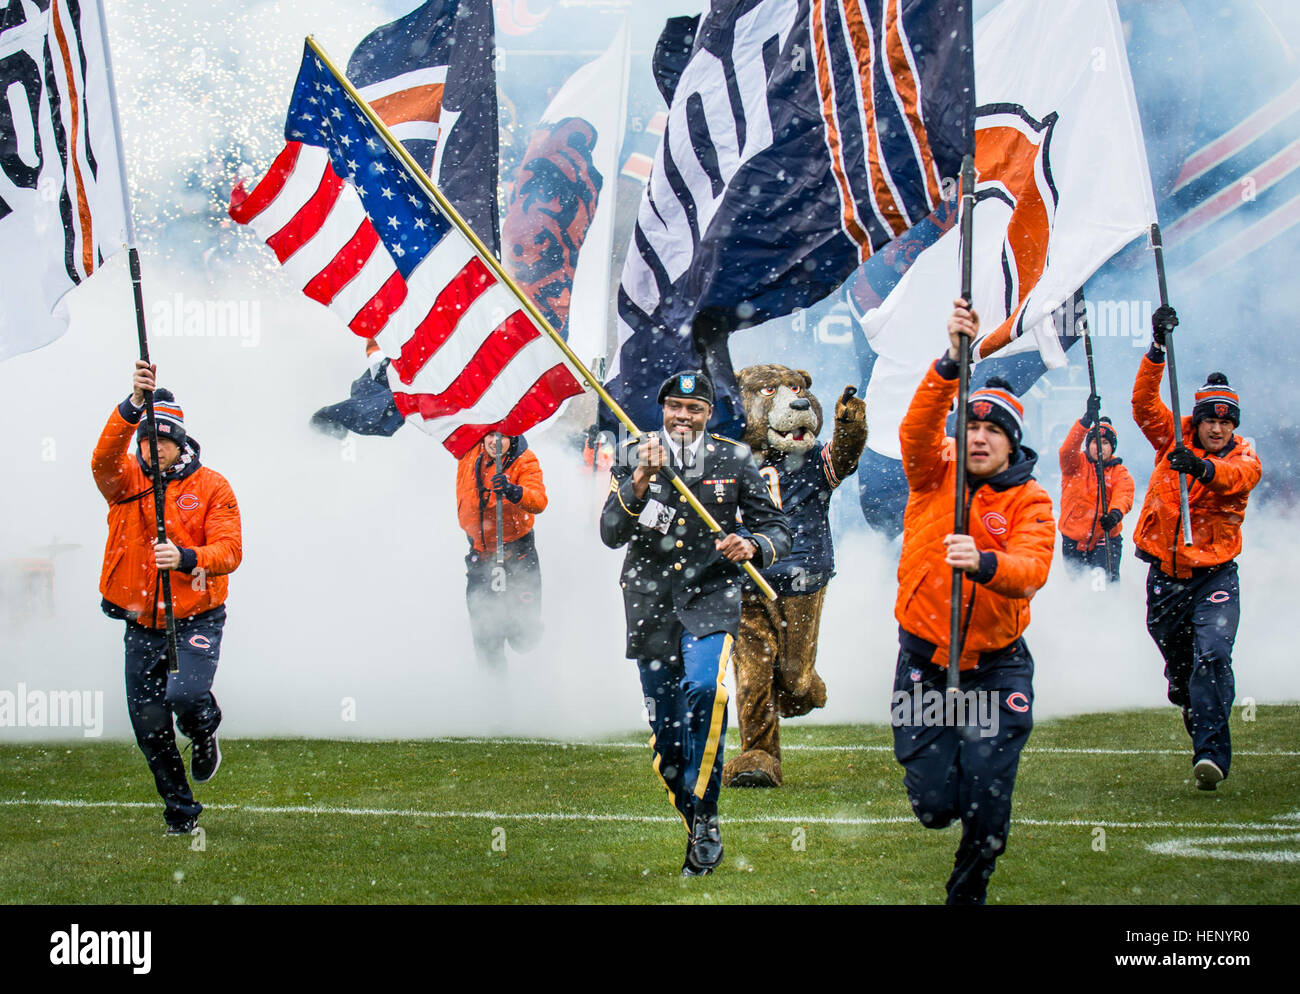 Sgt. Brian Abrams, Army Reserve Soldier with the 863rd Engineer Battalion, Forward Support Company, carries the American flag onto the field leading the Chicago Bears team members onto the field prior to kickoff during an NFL game designated to honor veterans and military service members at Soldier Field in Chicago, Nov. 16. (U.S. Army photo by Sgt. 1st Class Michel Sauret) Military service members honored during Chicago Bears game 141116-A-TI382-311 Stock Photo